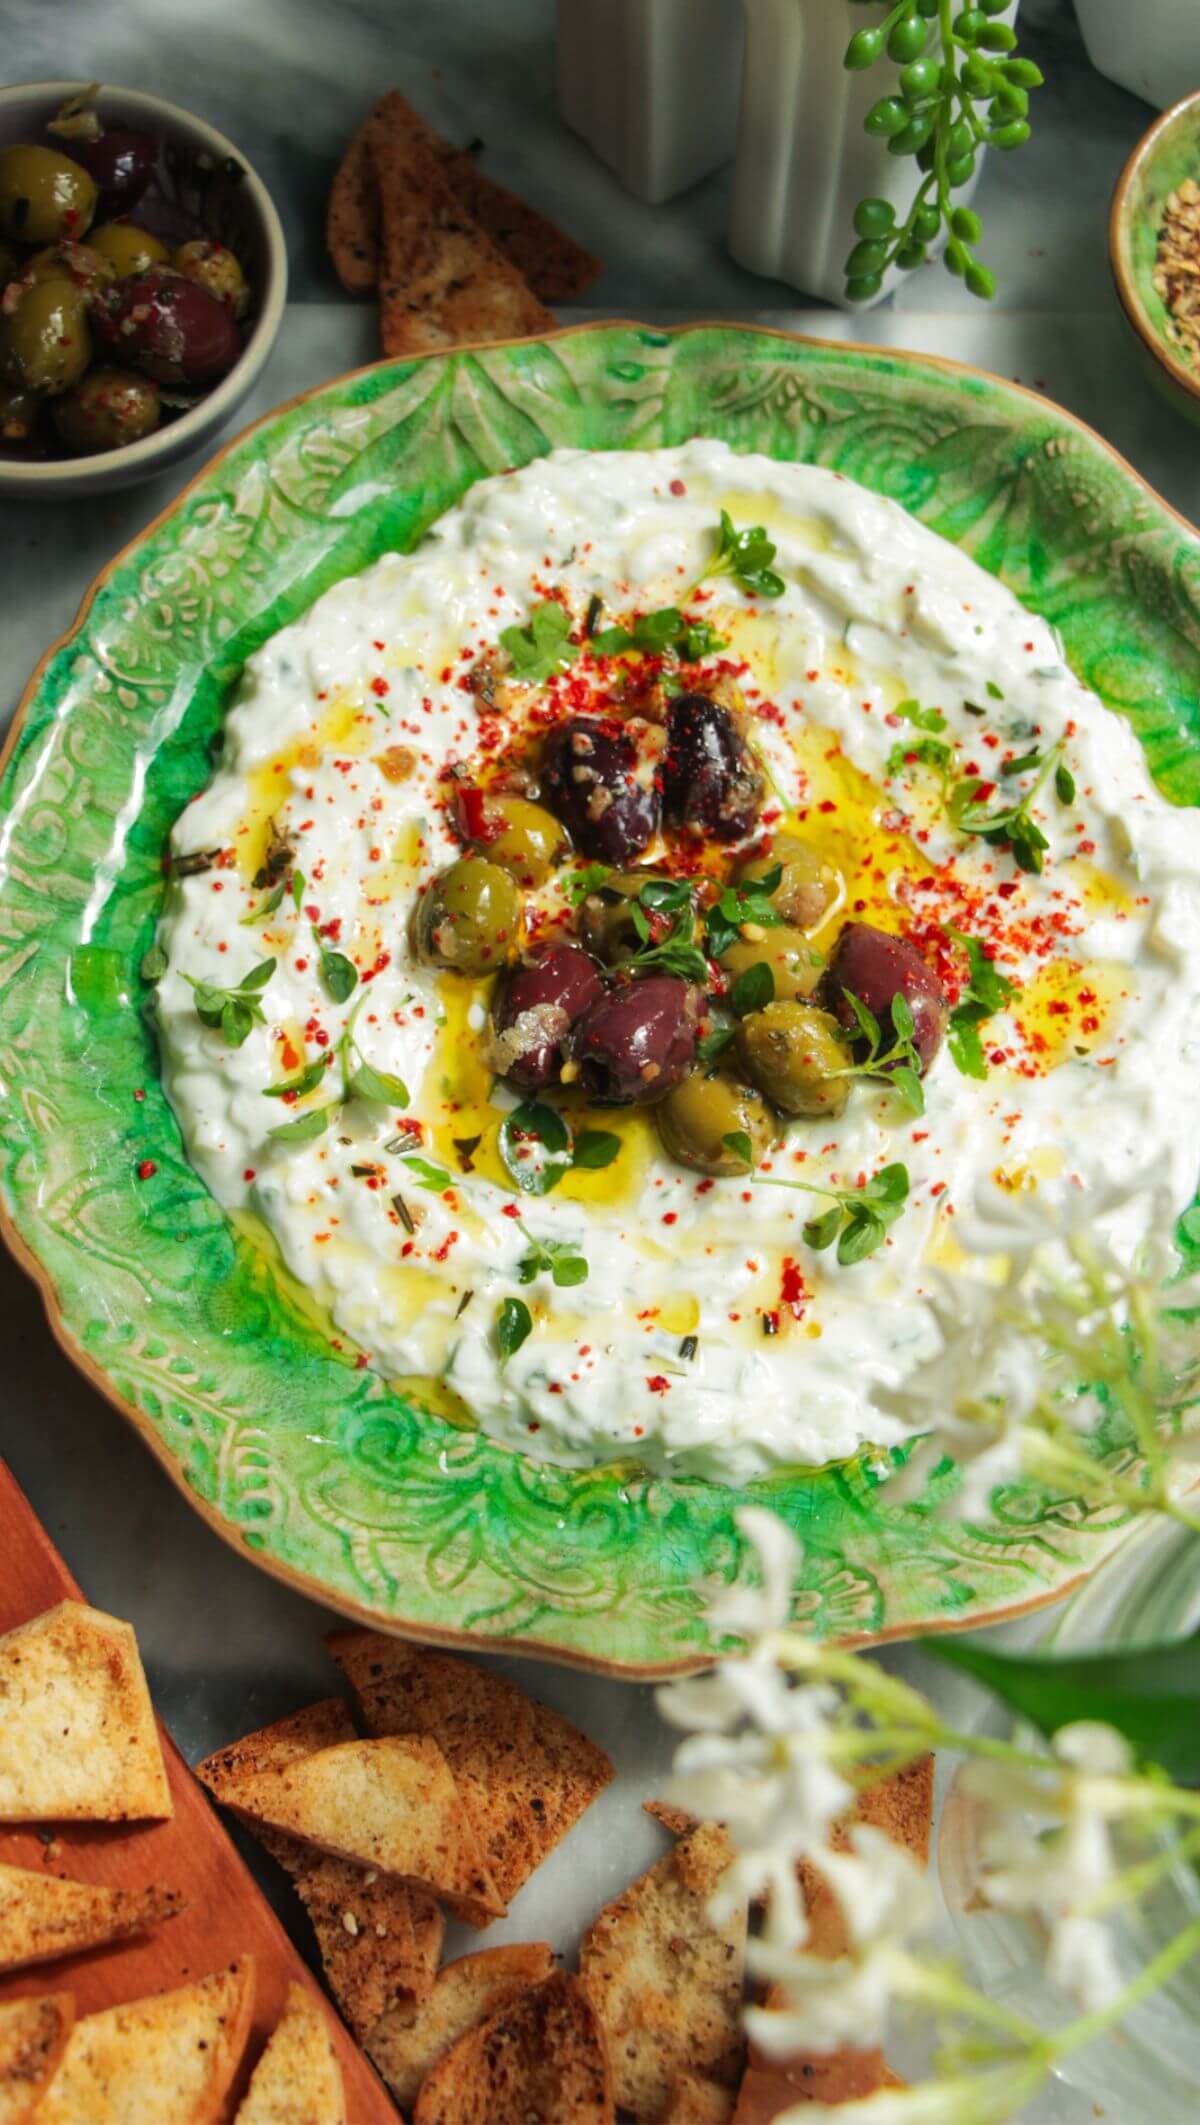 Tzatziki sauce spread onto a small green serving plate, topped with marinated olives with pita chips on the side.